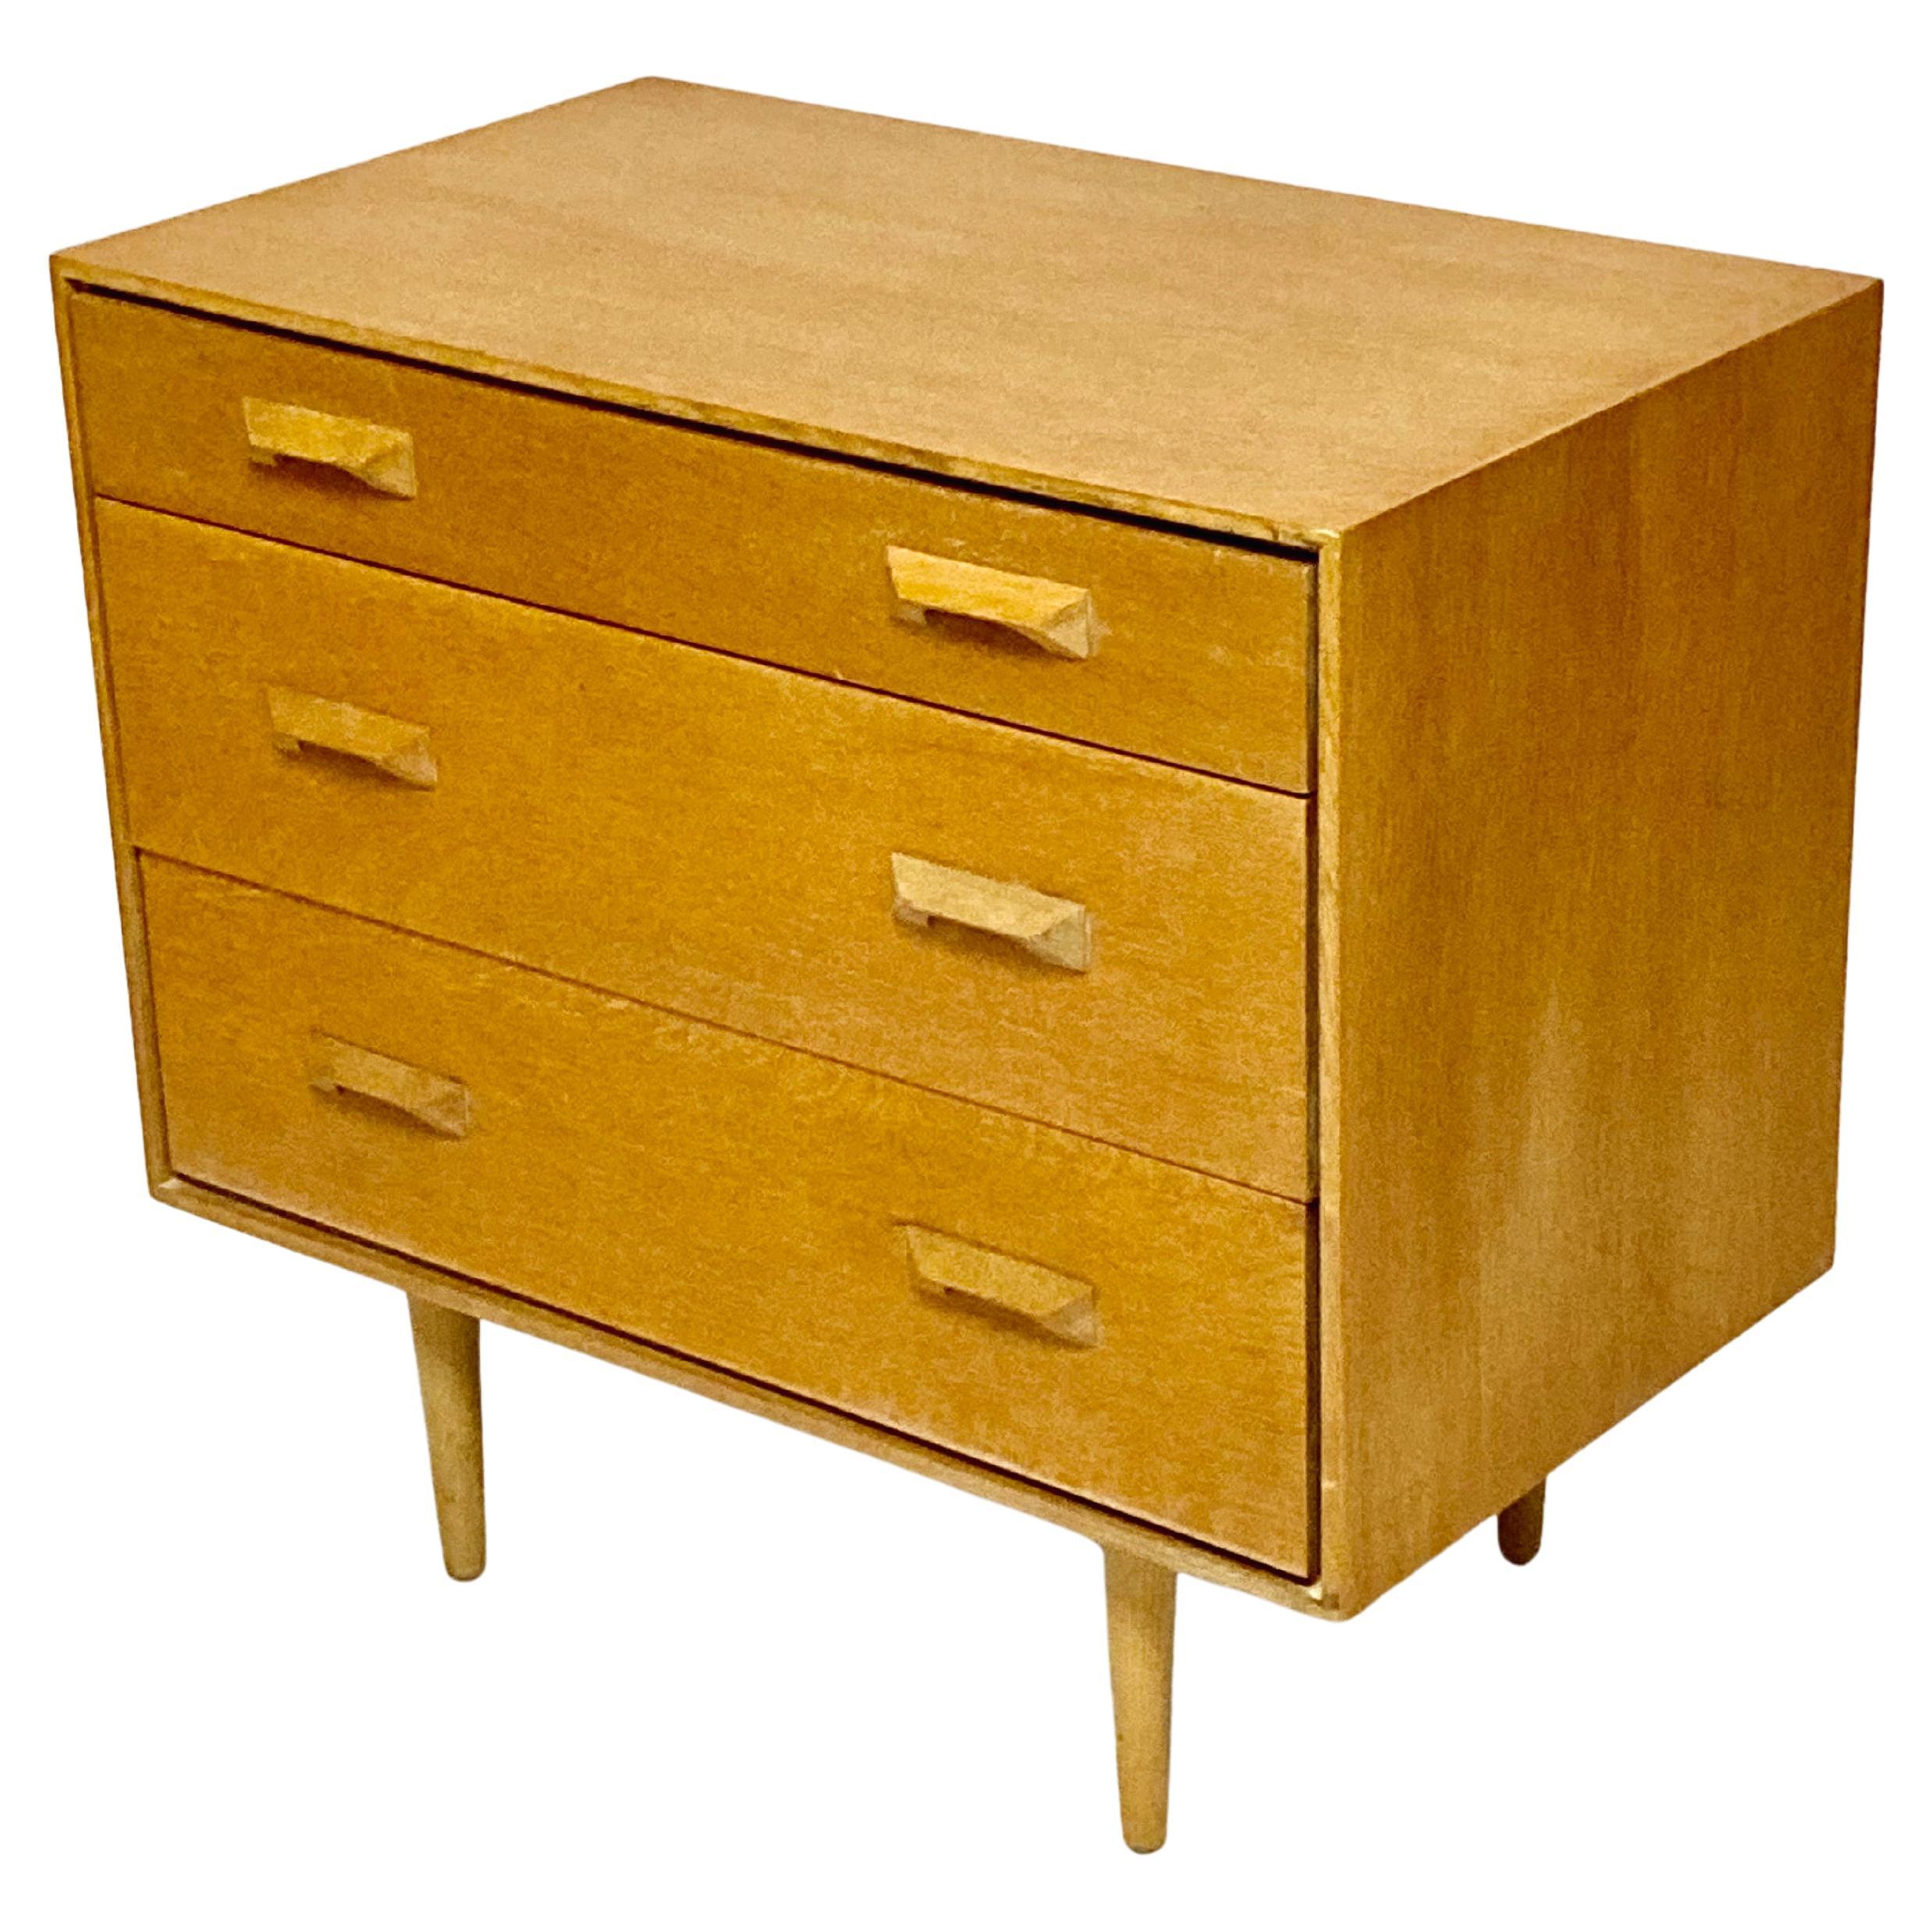 1960s Stag 'Concord' Chest of Drawers, Designed by John & Sylvia Reid, Light Oak